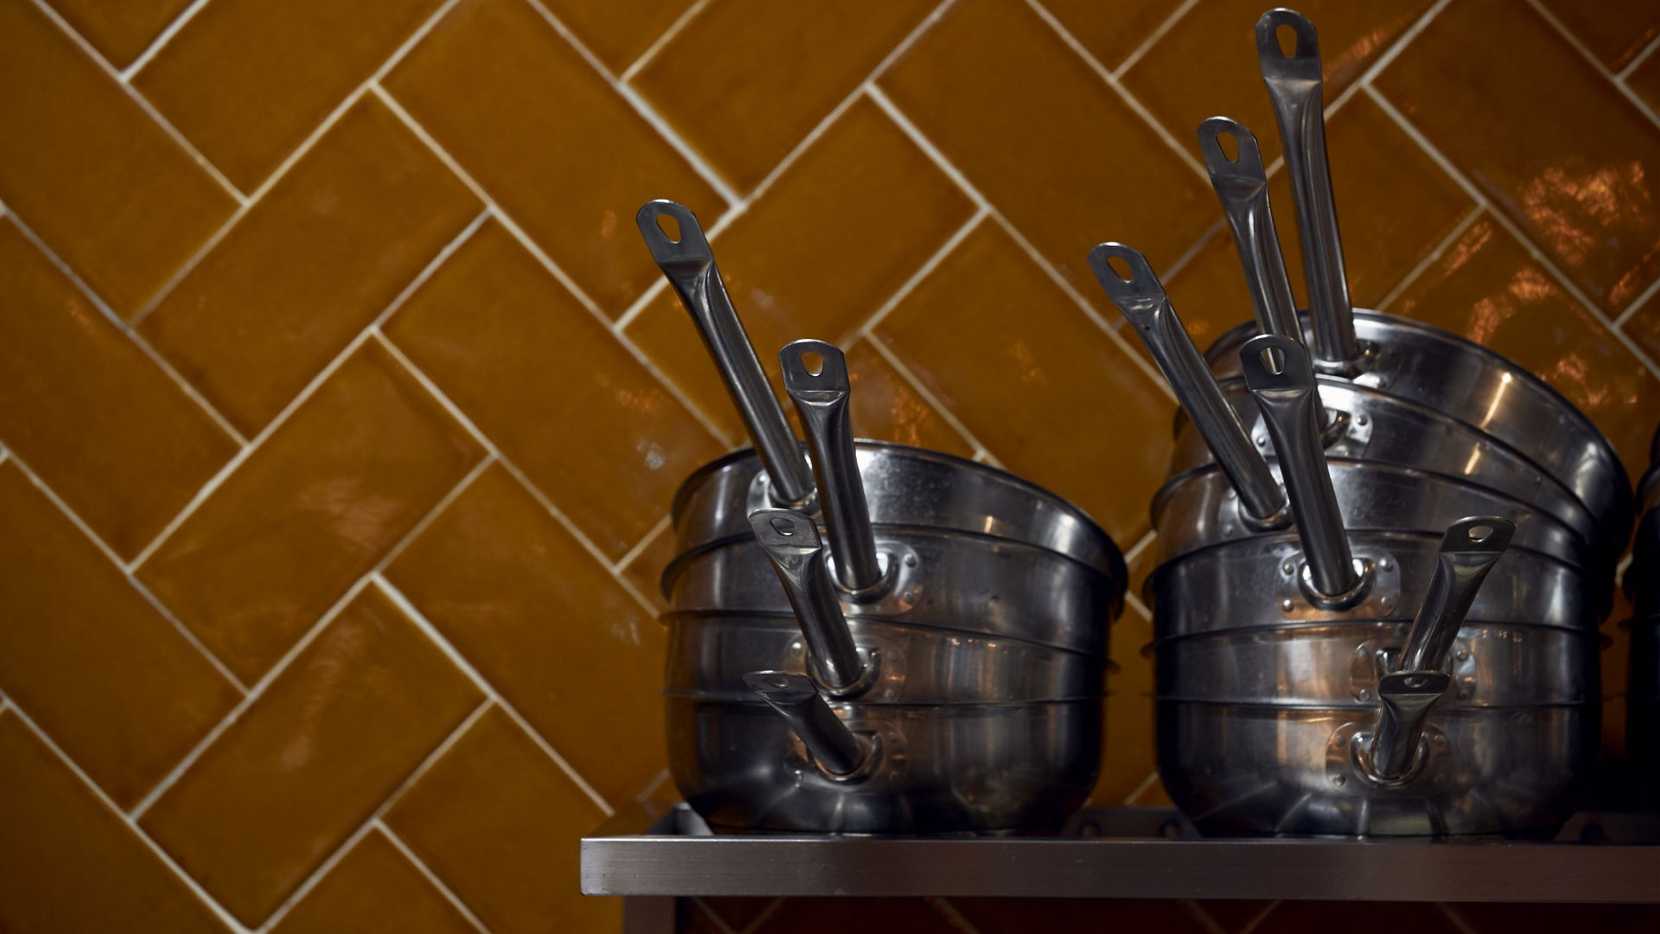 Pots and pans are piled high on a metal shelf, sitting in front of a burnt orange tile.